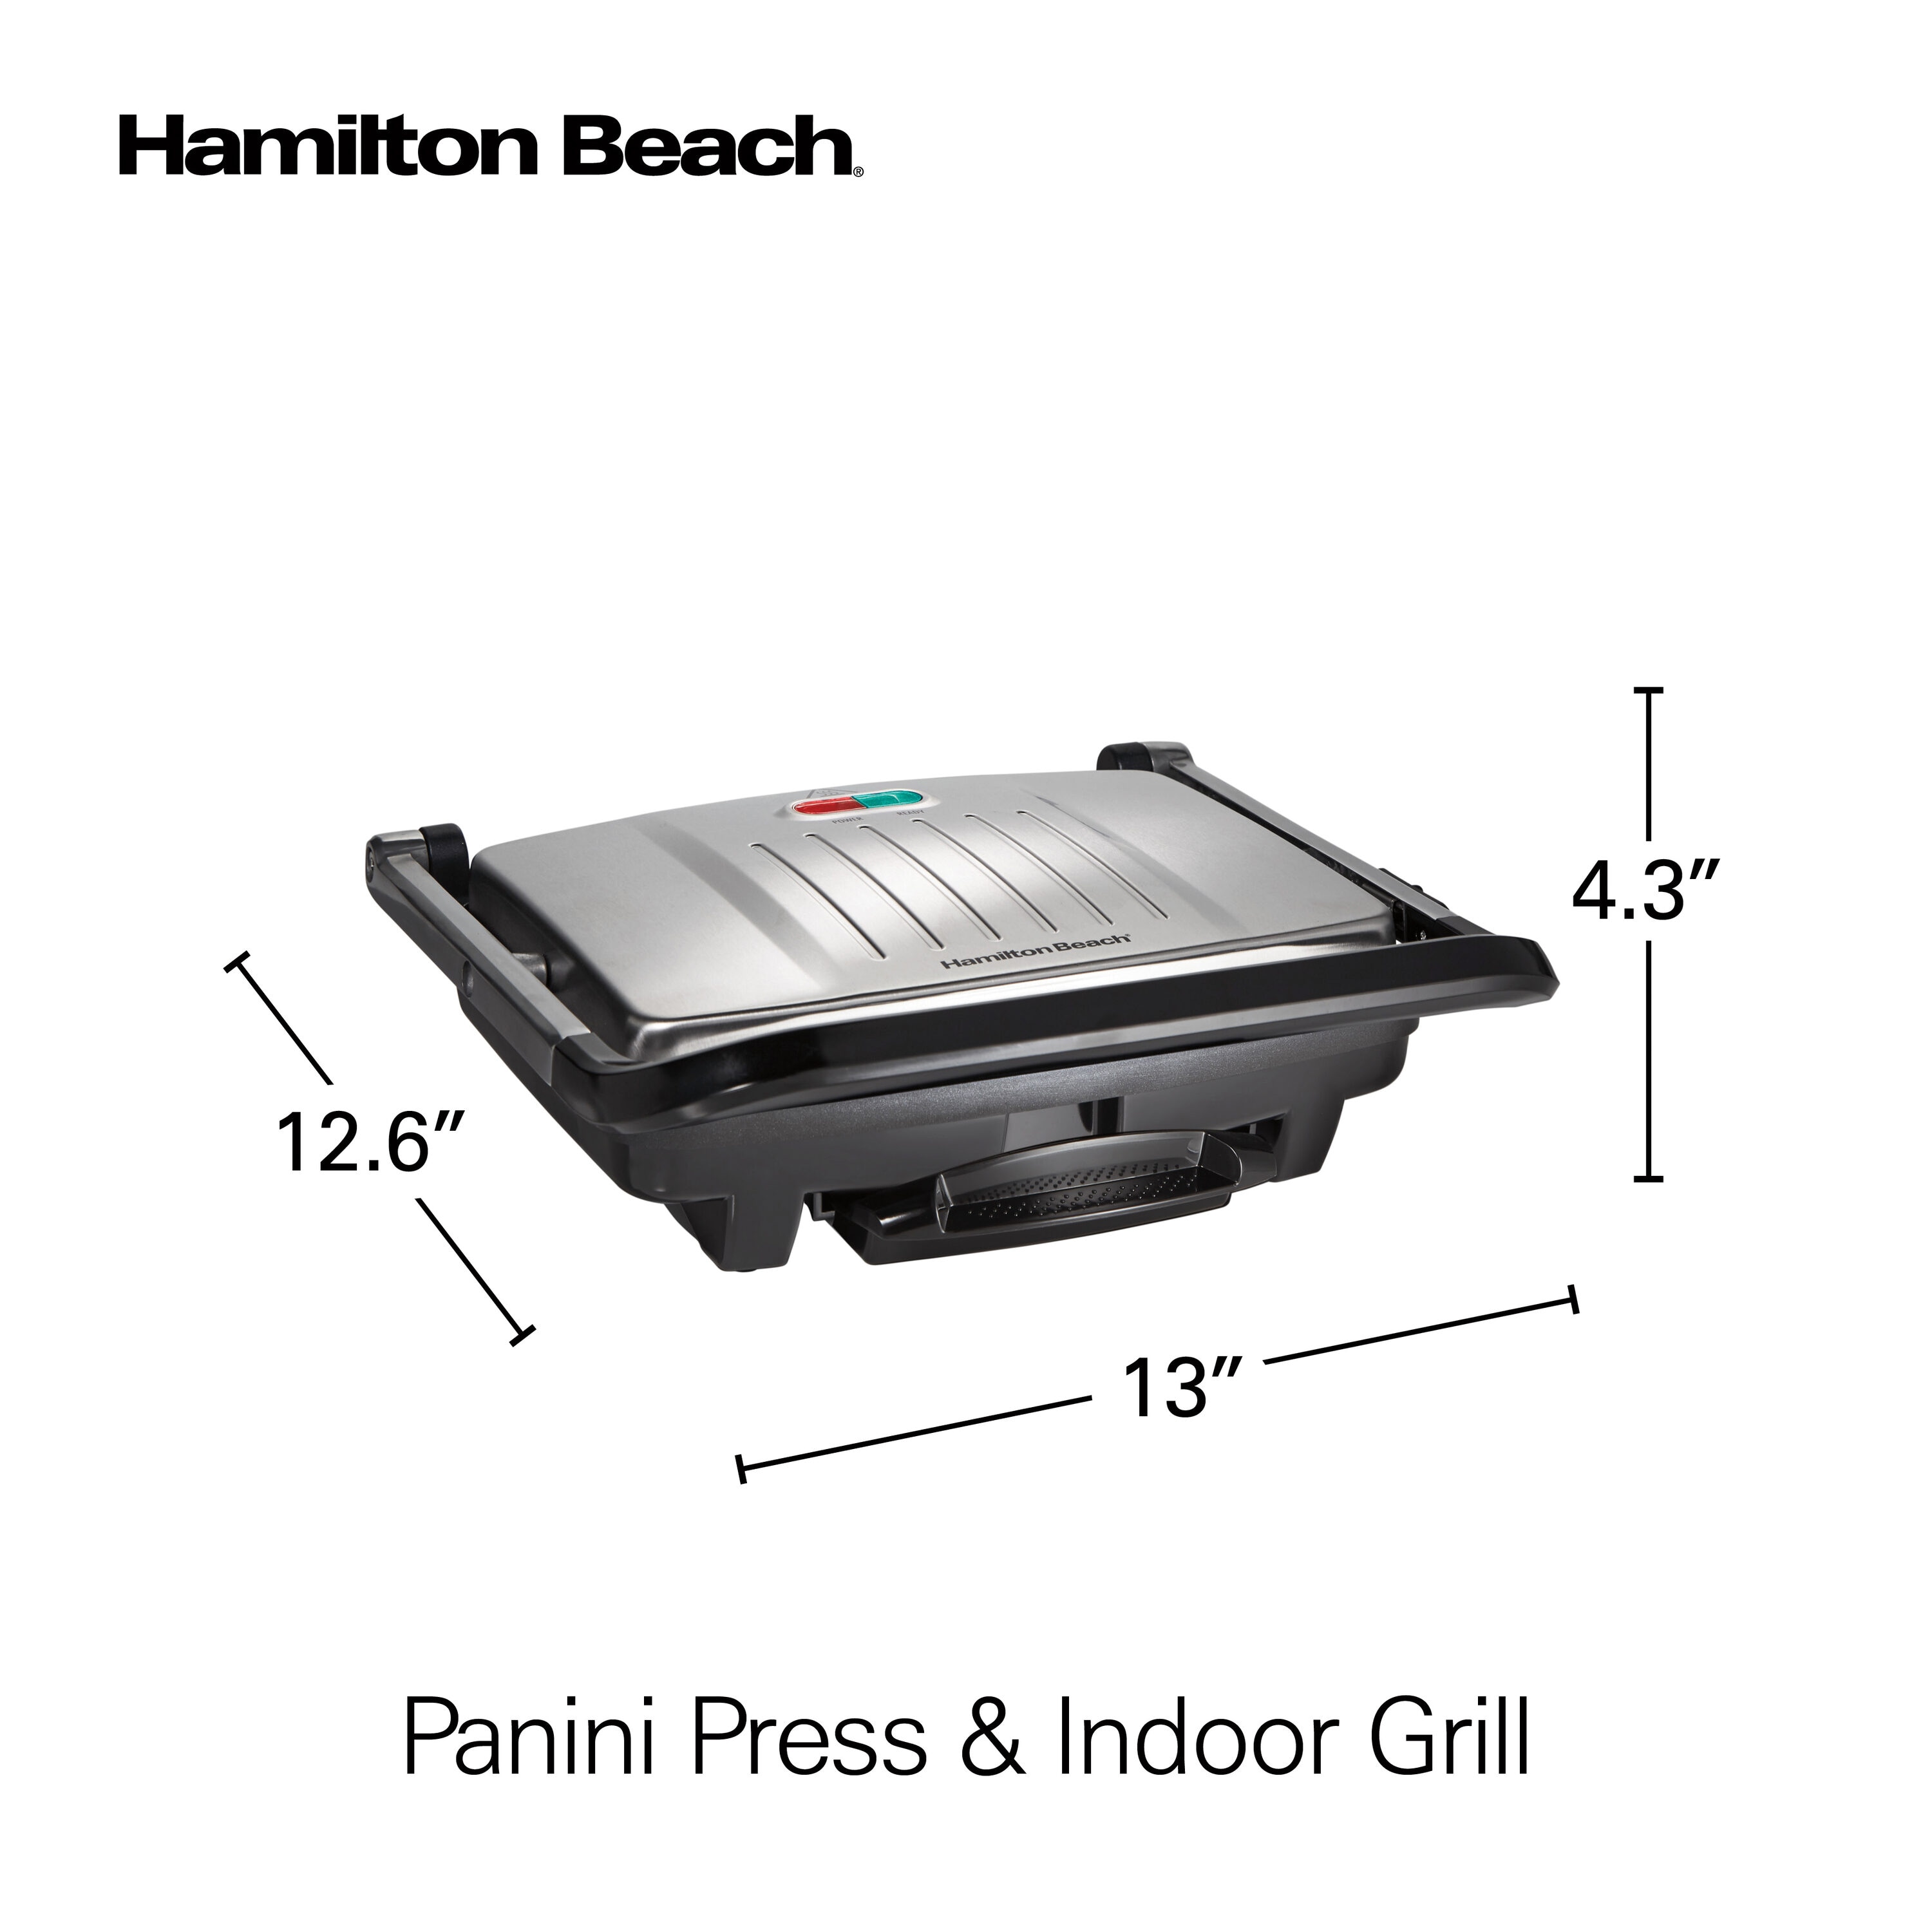 Hamilton Beach Stainless Steel Panini Press and Indoor Grill Silver